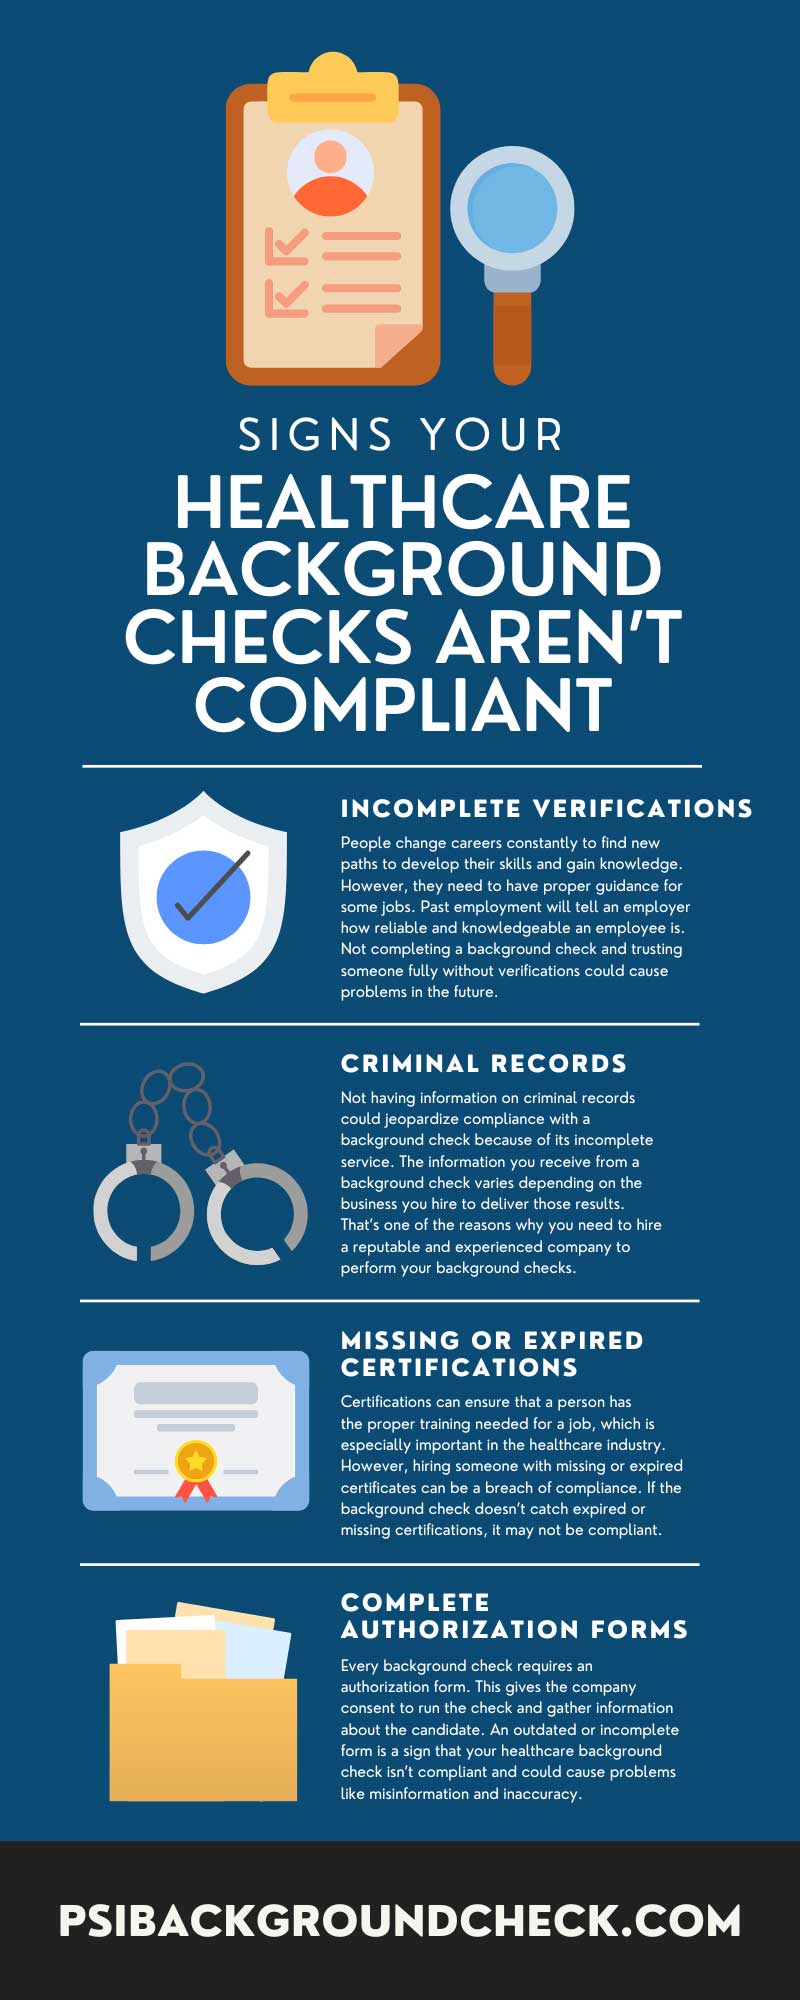 7 Signs Your Healthcare Background Checks Aren’t Compliant